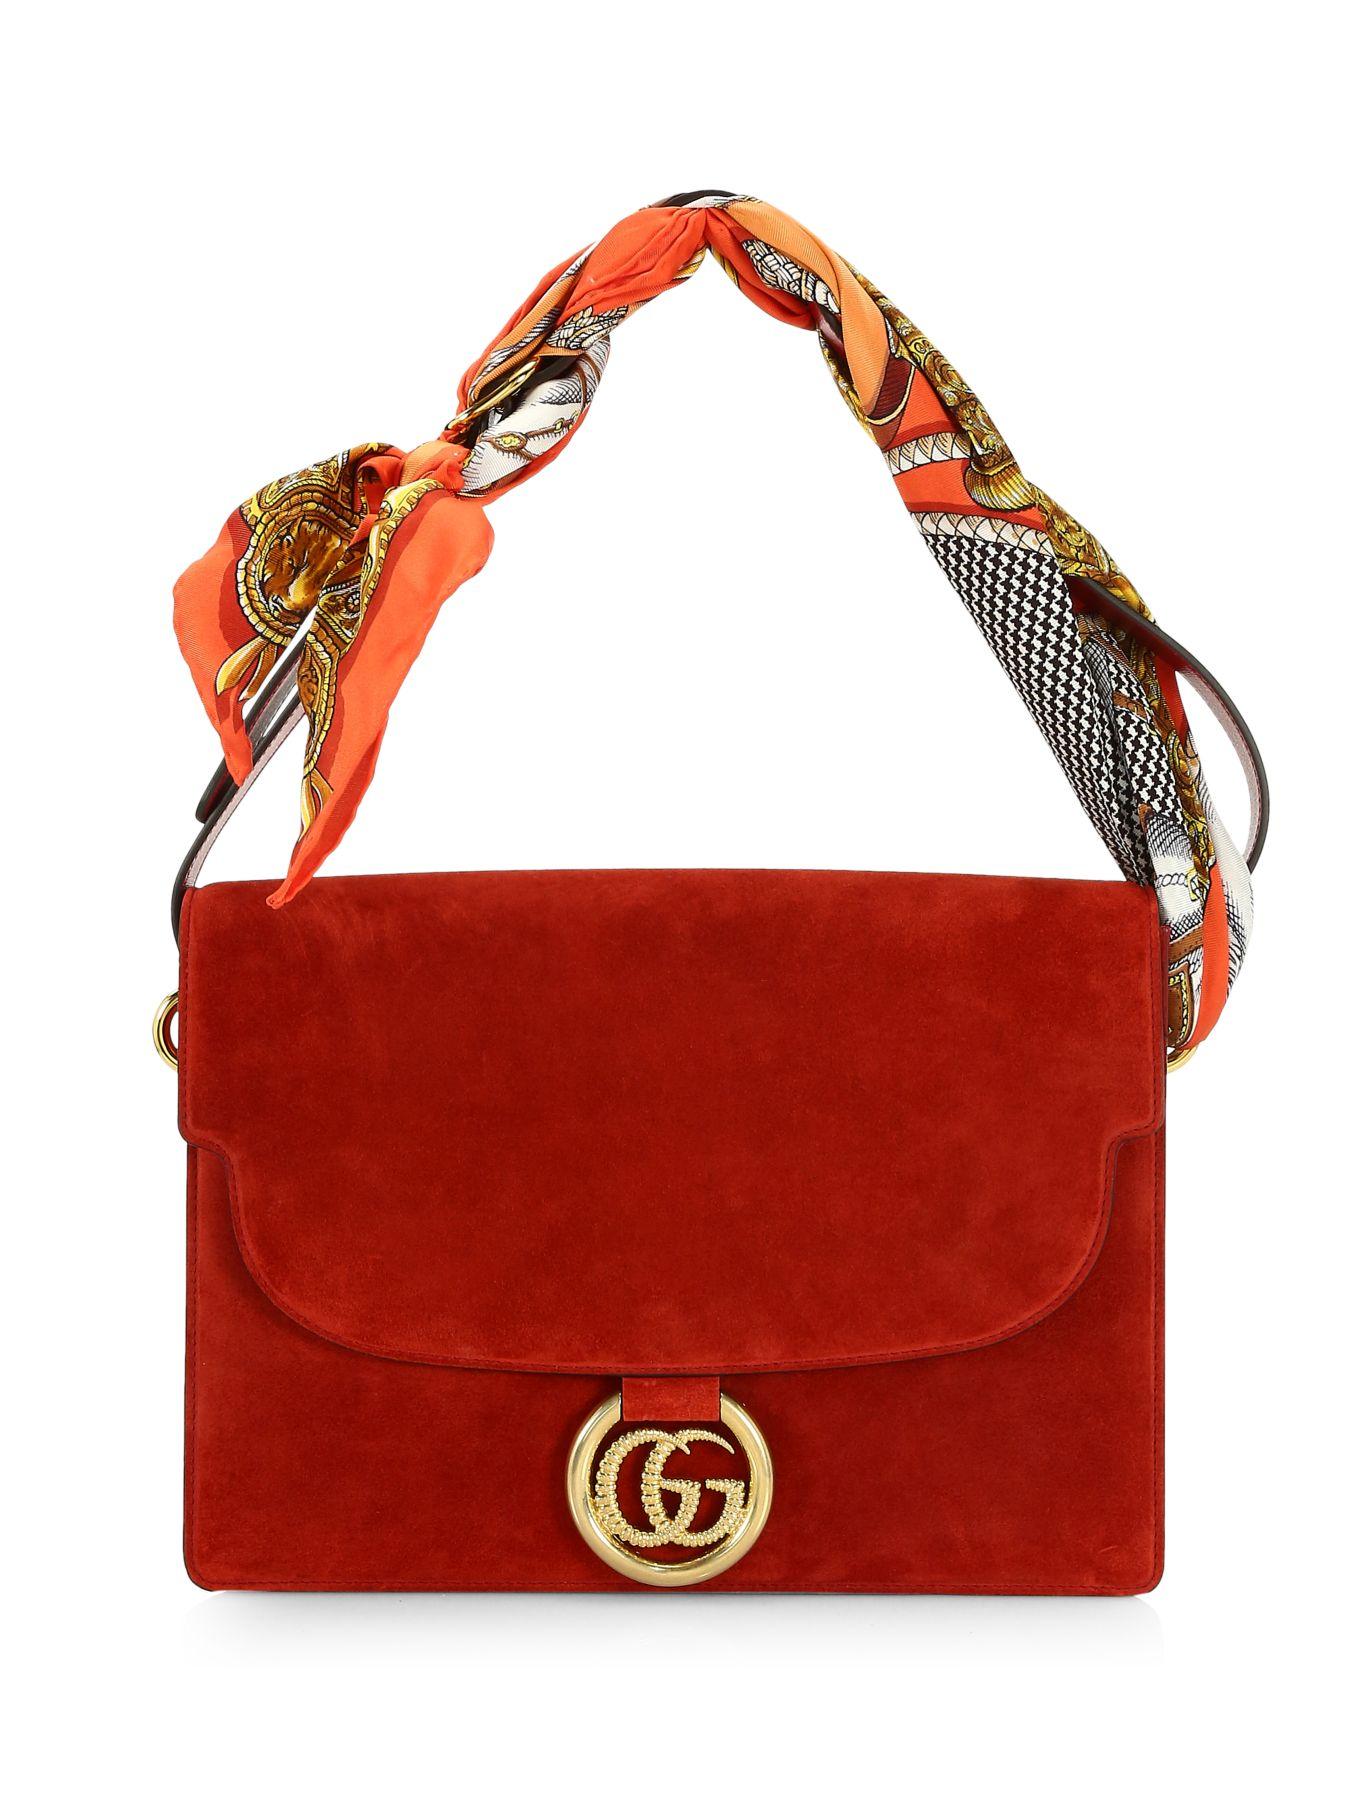 Gucci Medium Suede Shoulder Bag With Scarf in Red | Lyst